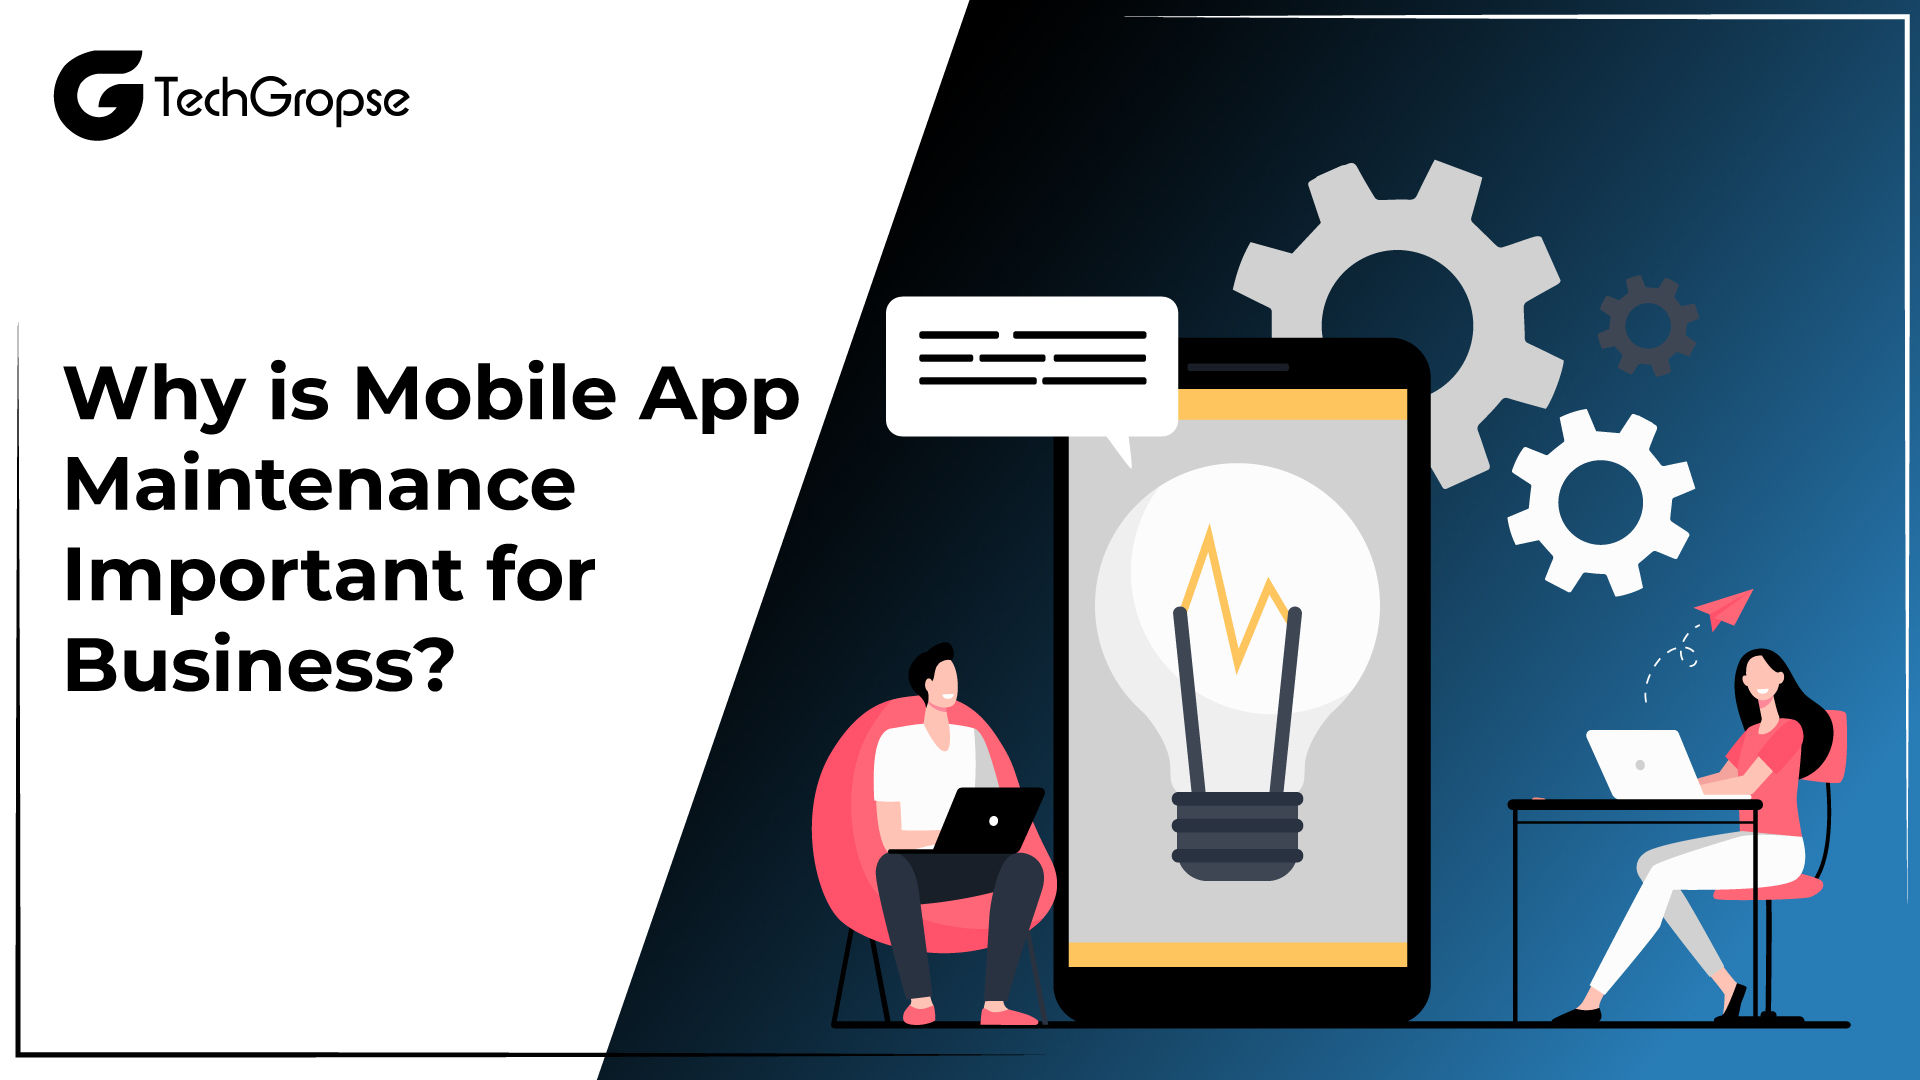 Why is Mobile App Maintenance Important for Business?